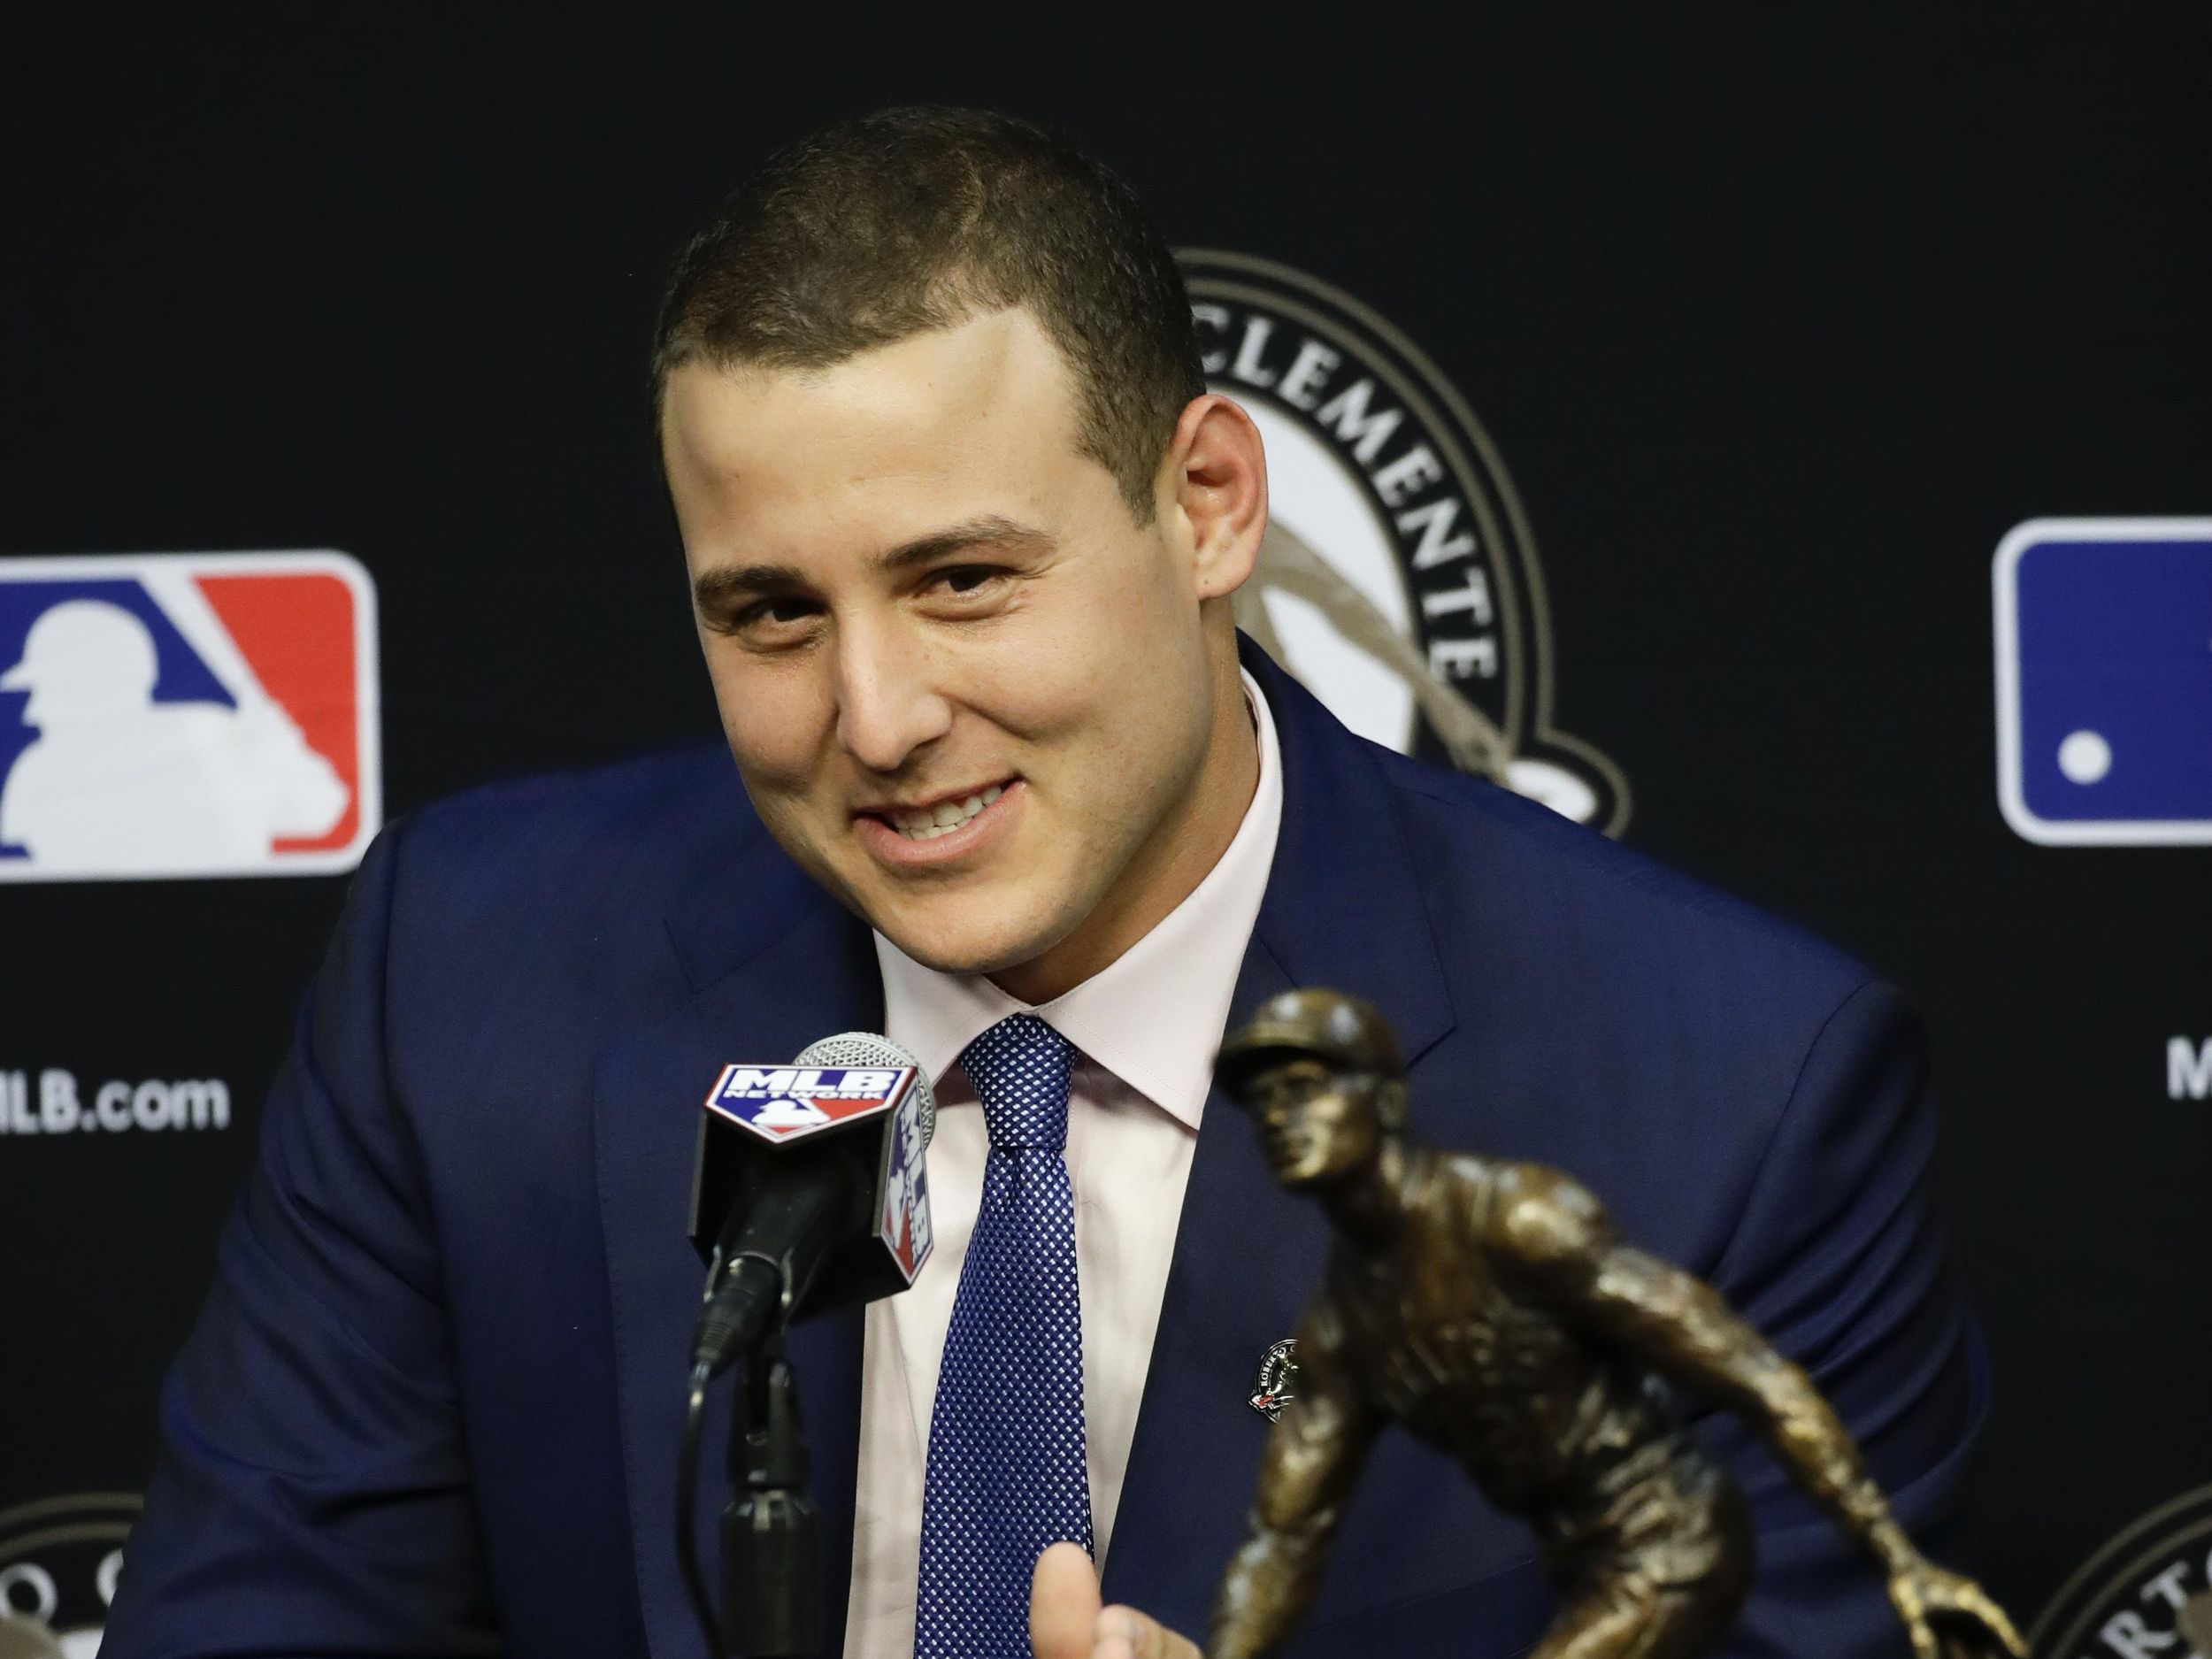 Anthony Rizzo wins Roberto Clemente Award - Bleed Cubbie Blue